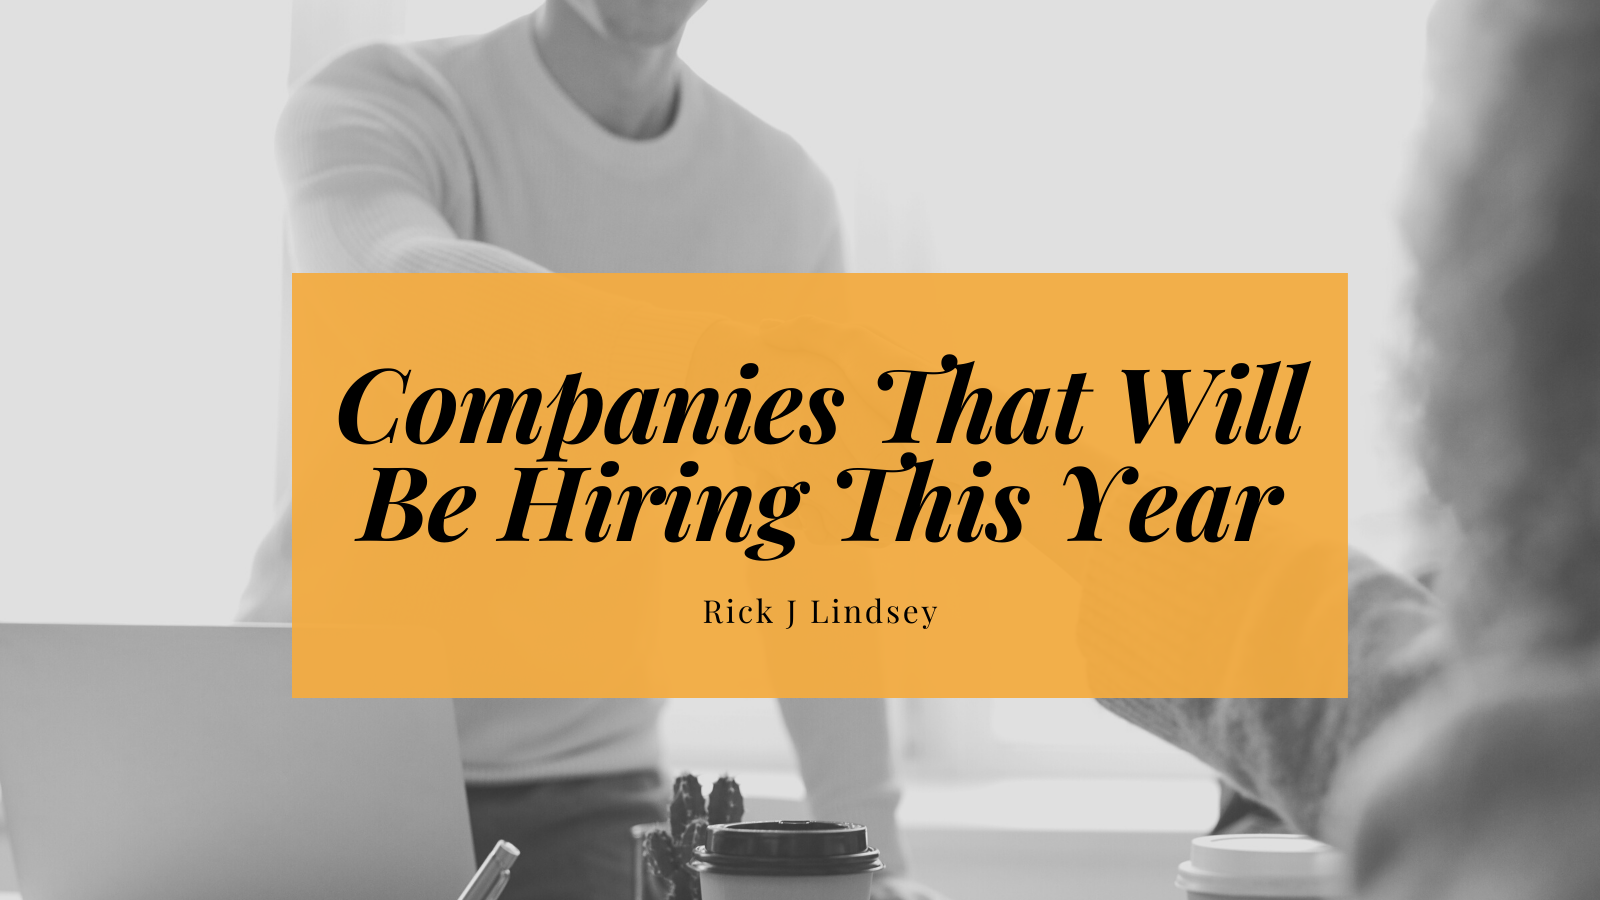 \
Companies That Will
Be Hiring This Year

Rick | Lindsey

= ws
EEE.